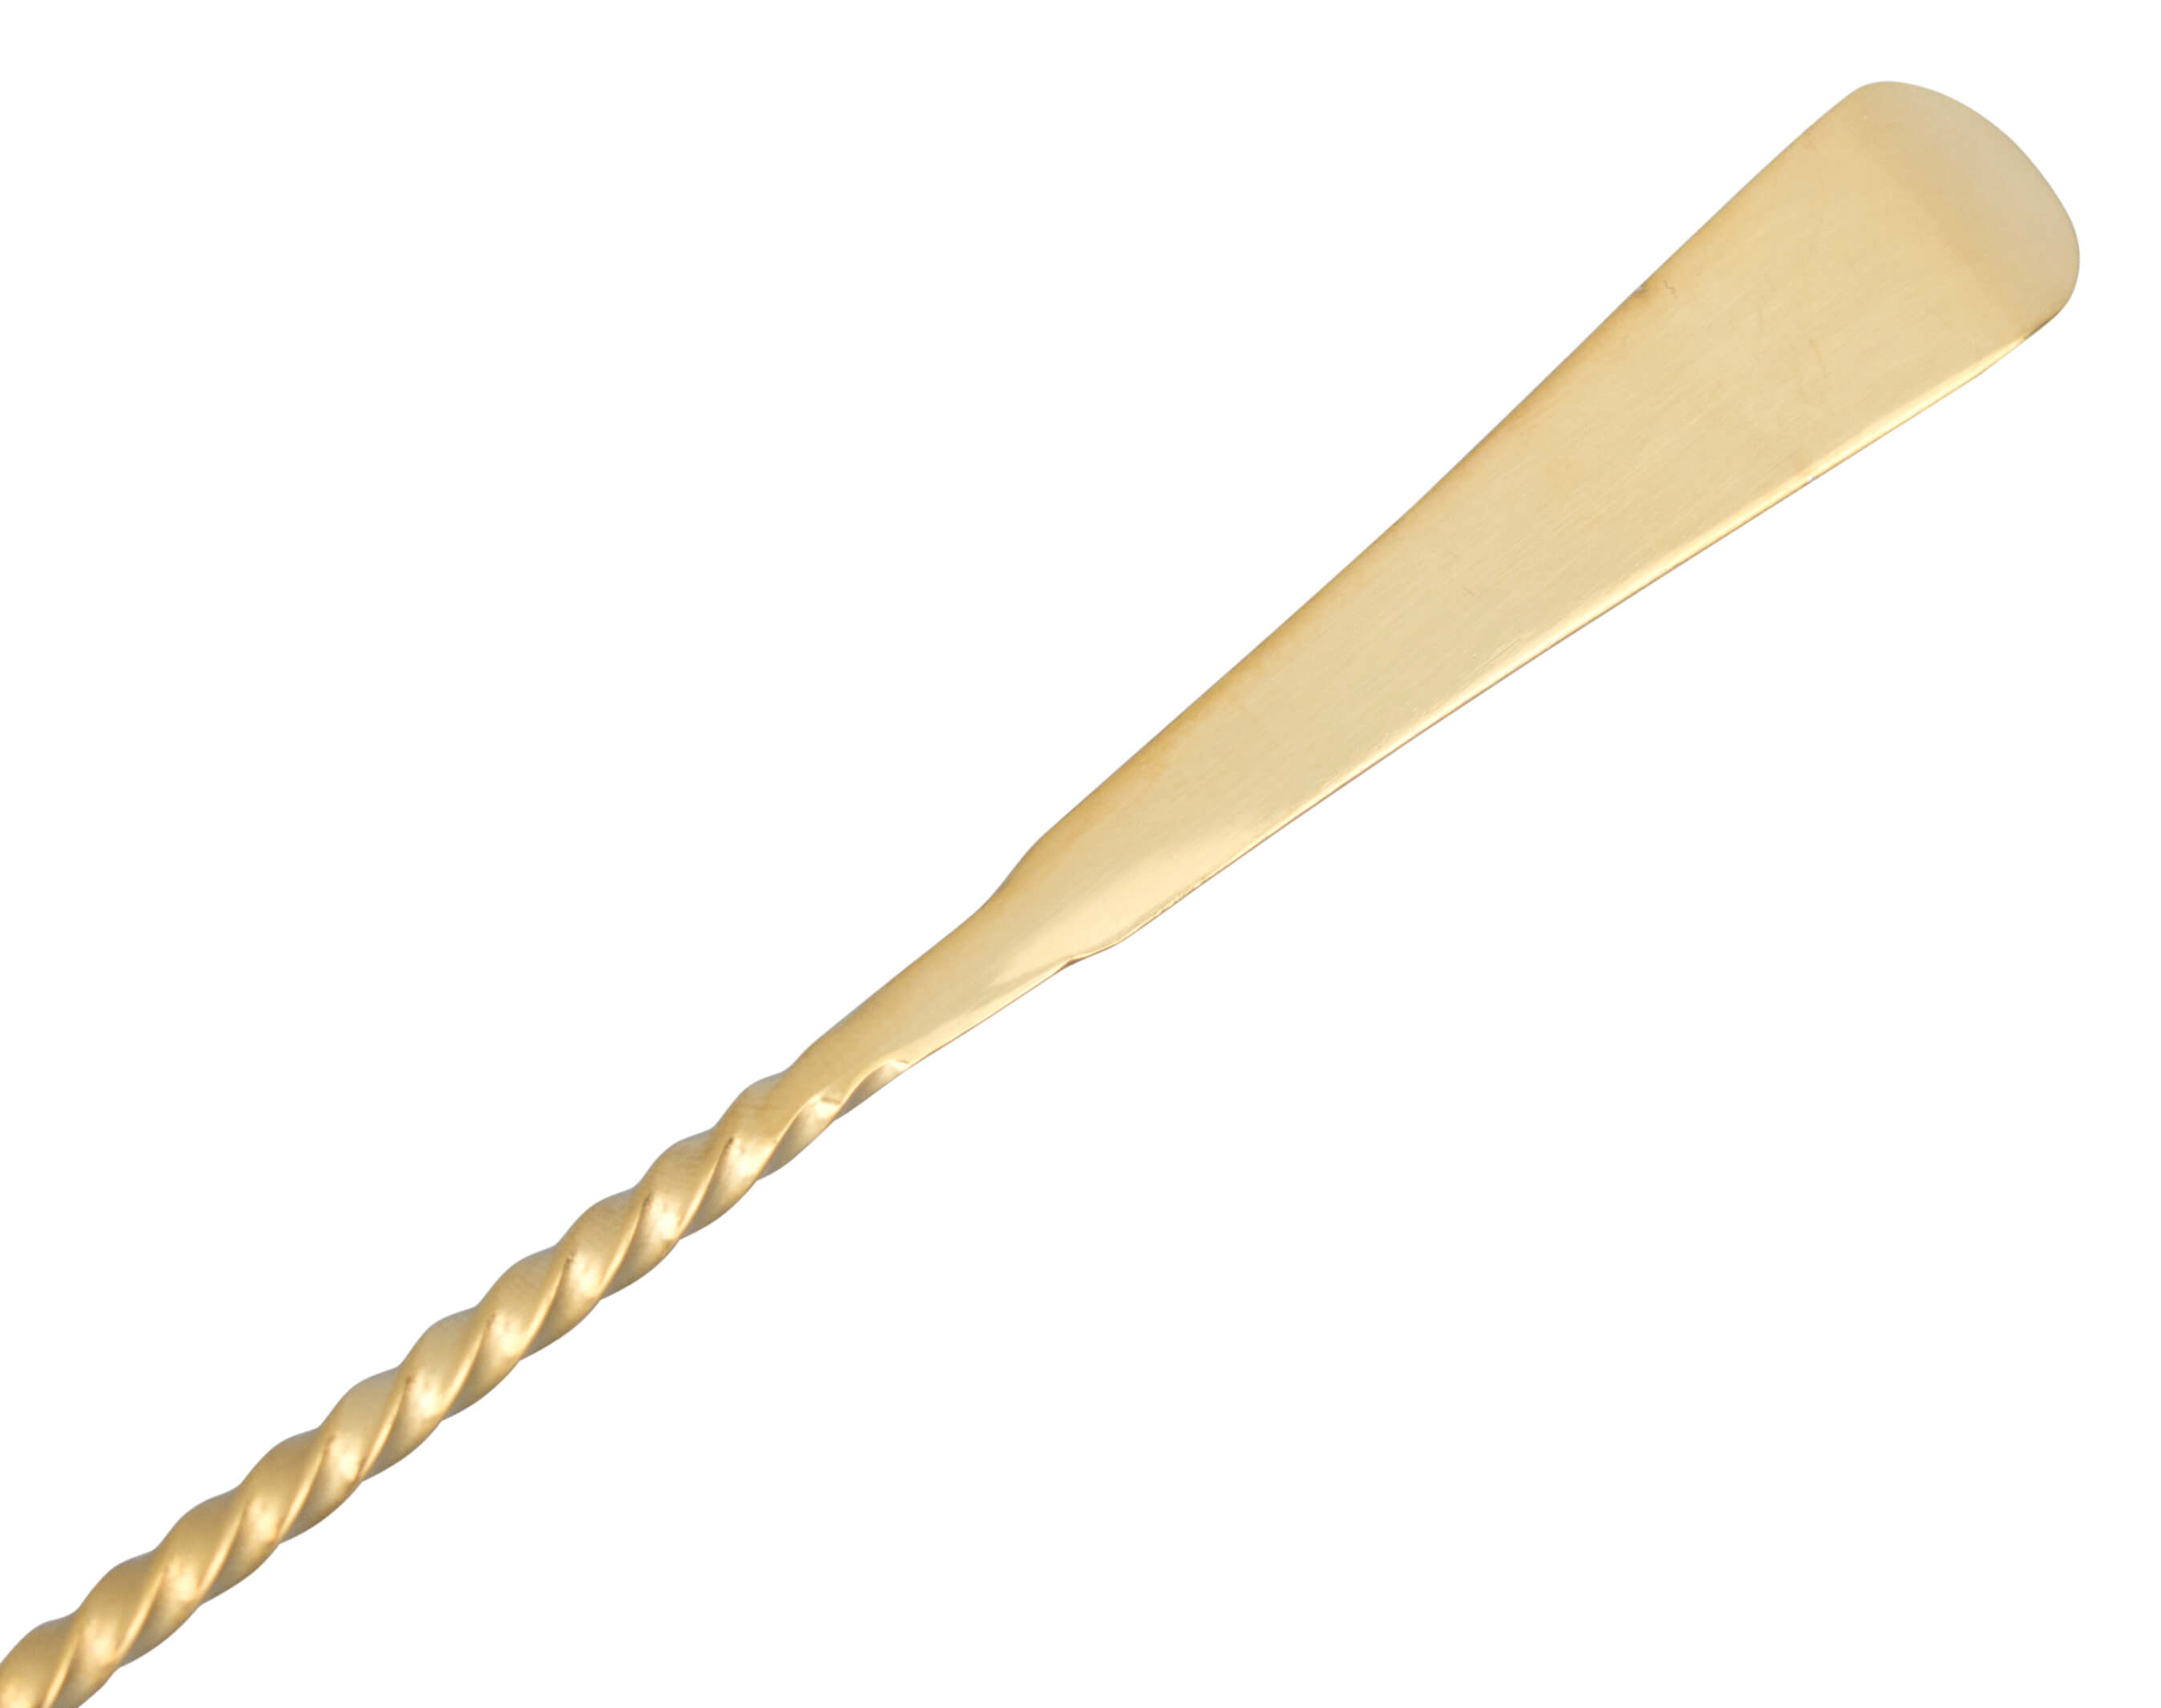 Bar Spoon Biloxi Strainer, stainless steel, gold-colored - 34,5cm